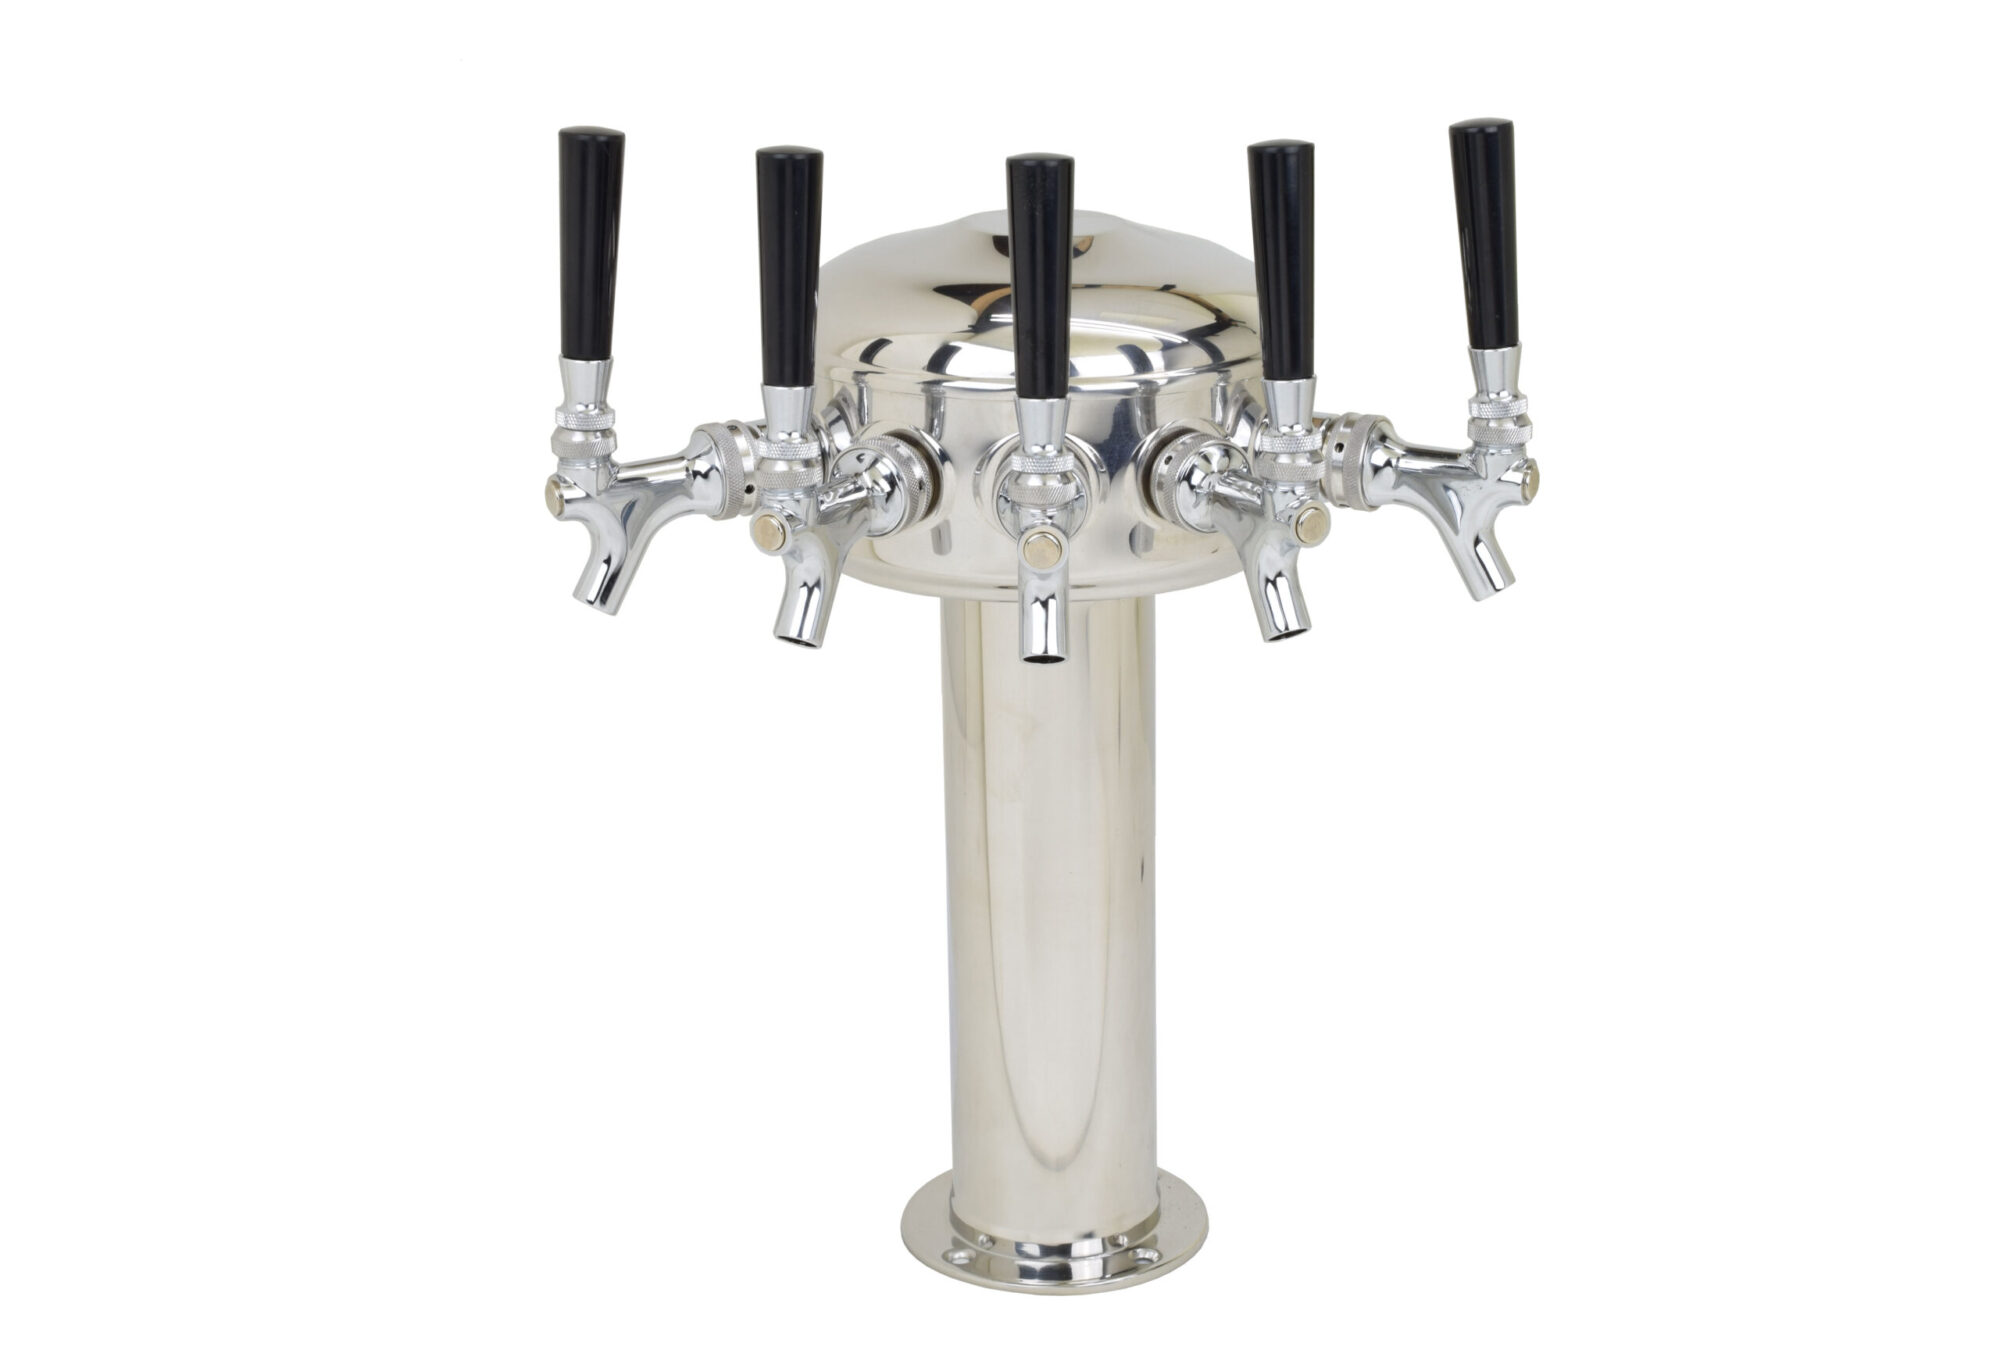 626CG-5front Five Faucet Mini Mushroom Tower with Chrome Plated Faucets and Shanks - Glycol Ready